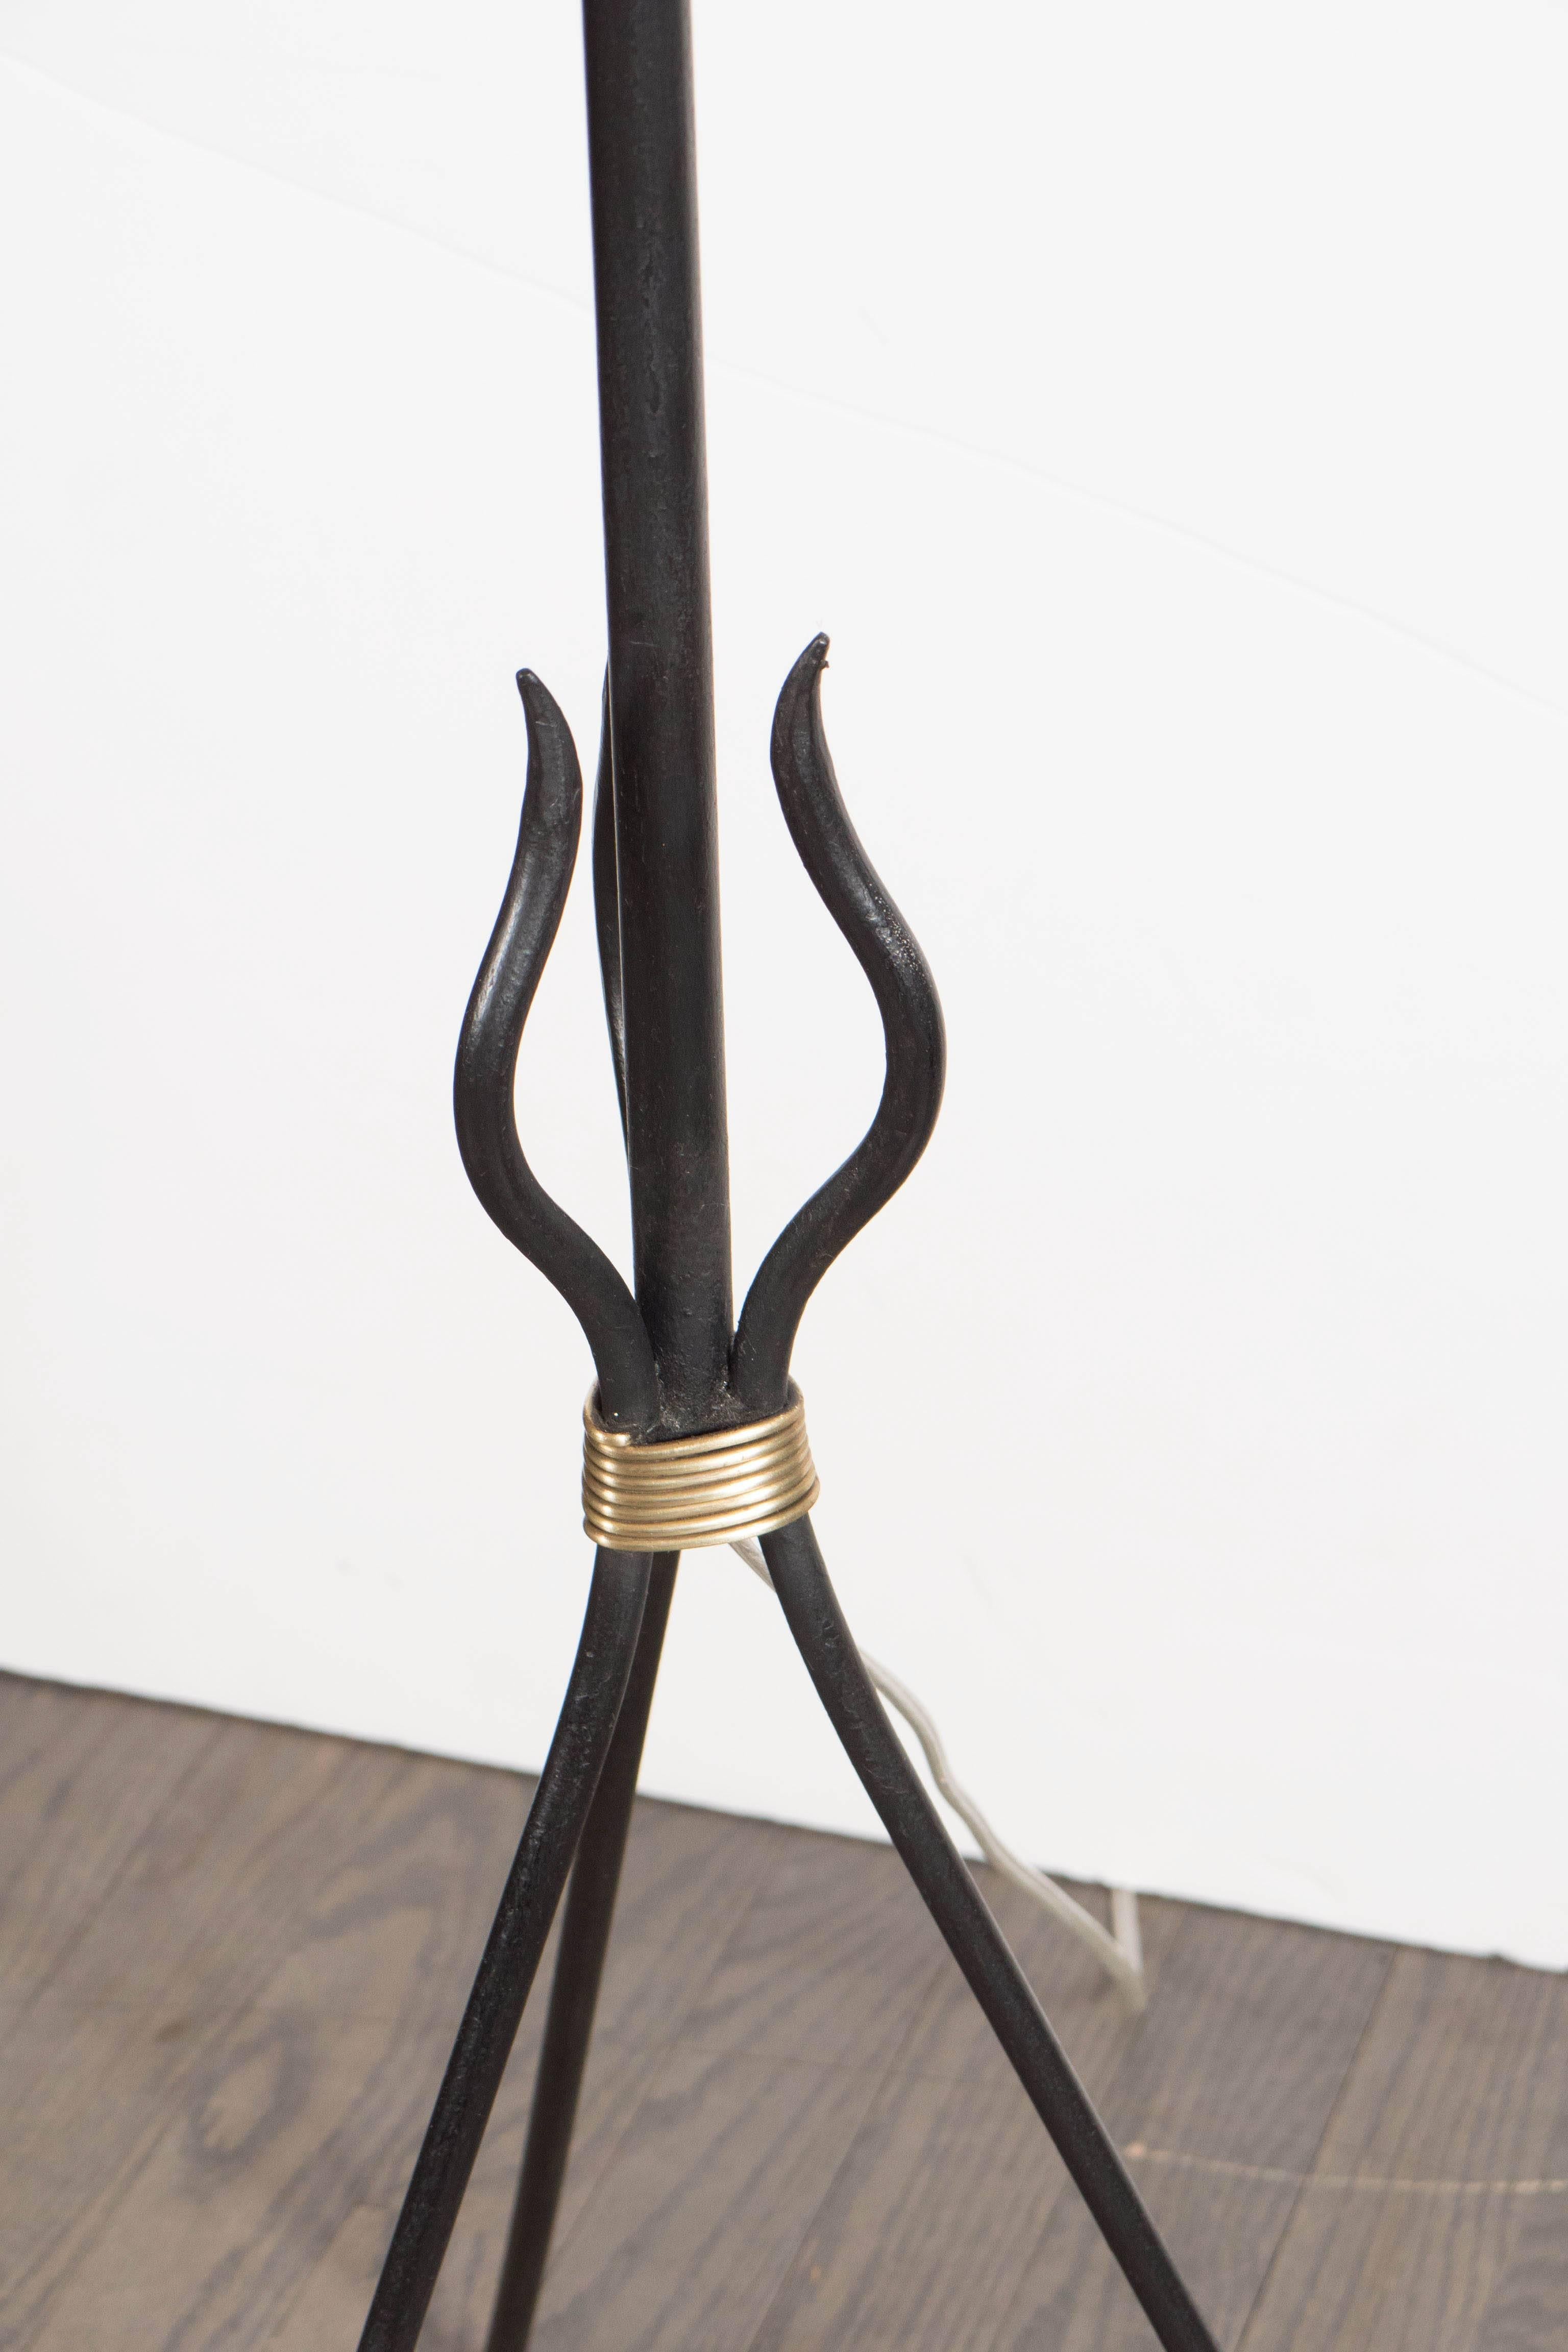 French Sculptural Floor Lamp in Wrought Iron and Bronze in the Manner of Jean Royere